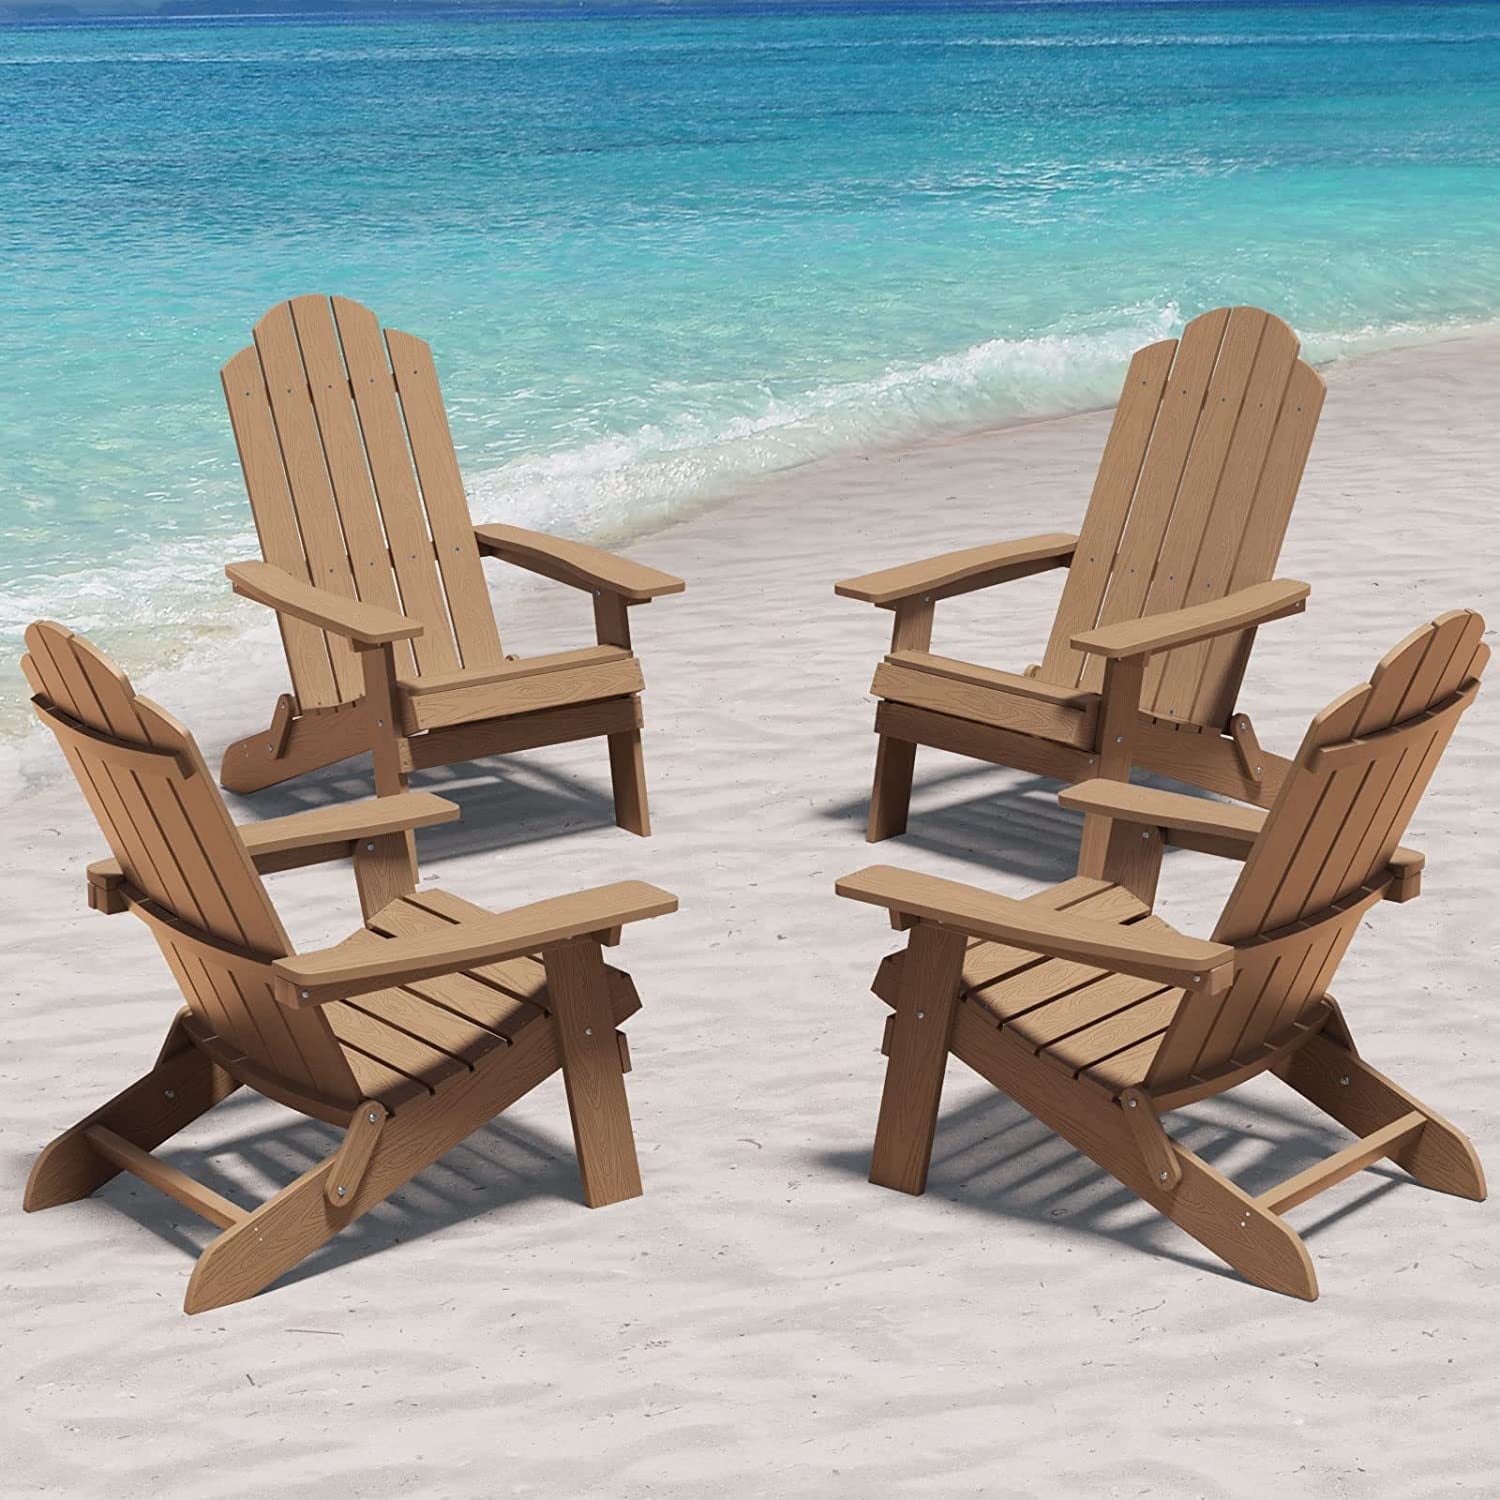 Winsoon All Weather Hips Outdoor Folding Adirondack Chairs Outdoor Chairs Set Of 4